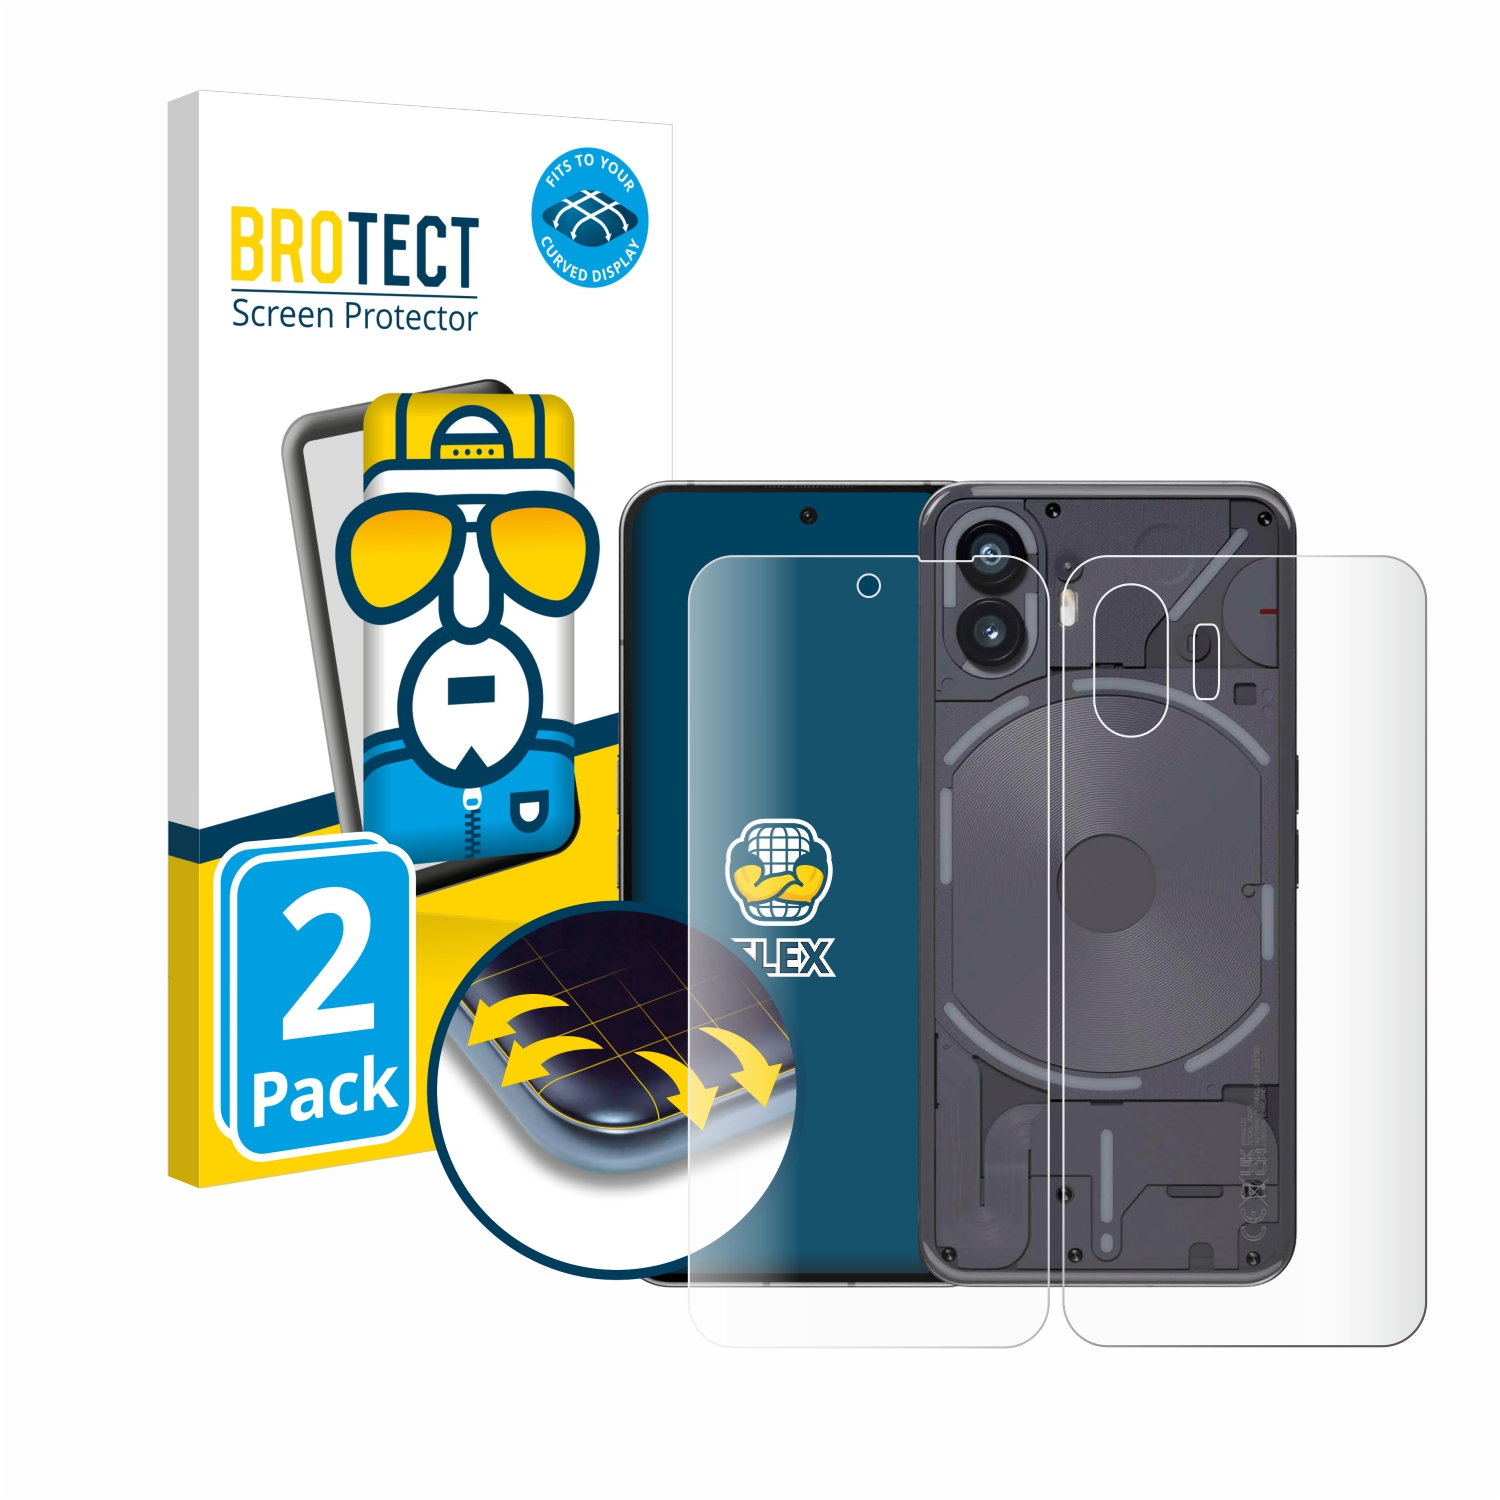 BROTECT 2x Flex Curved Full-Cover Schutzfolie(für (2)) 3D Phone Nothing